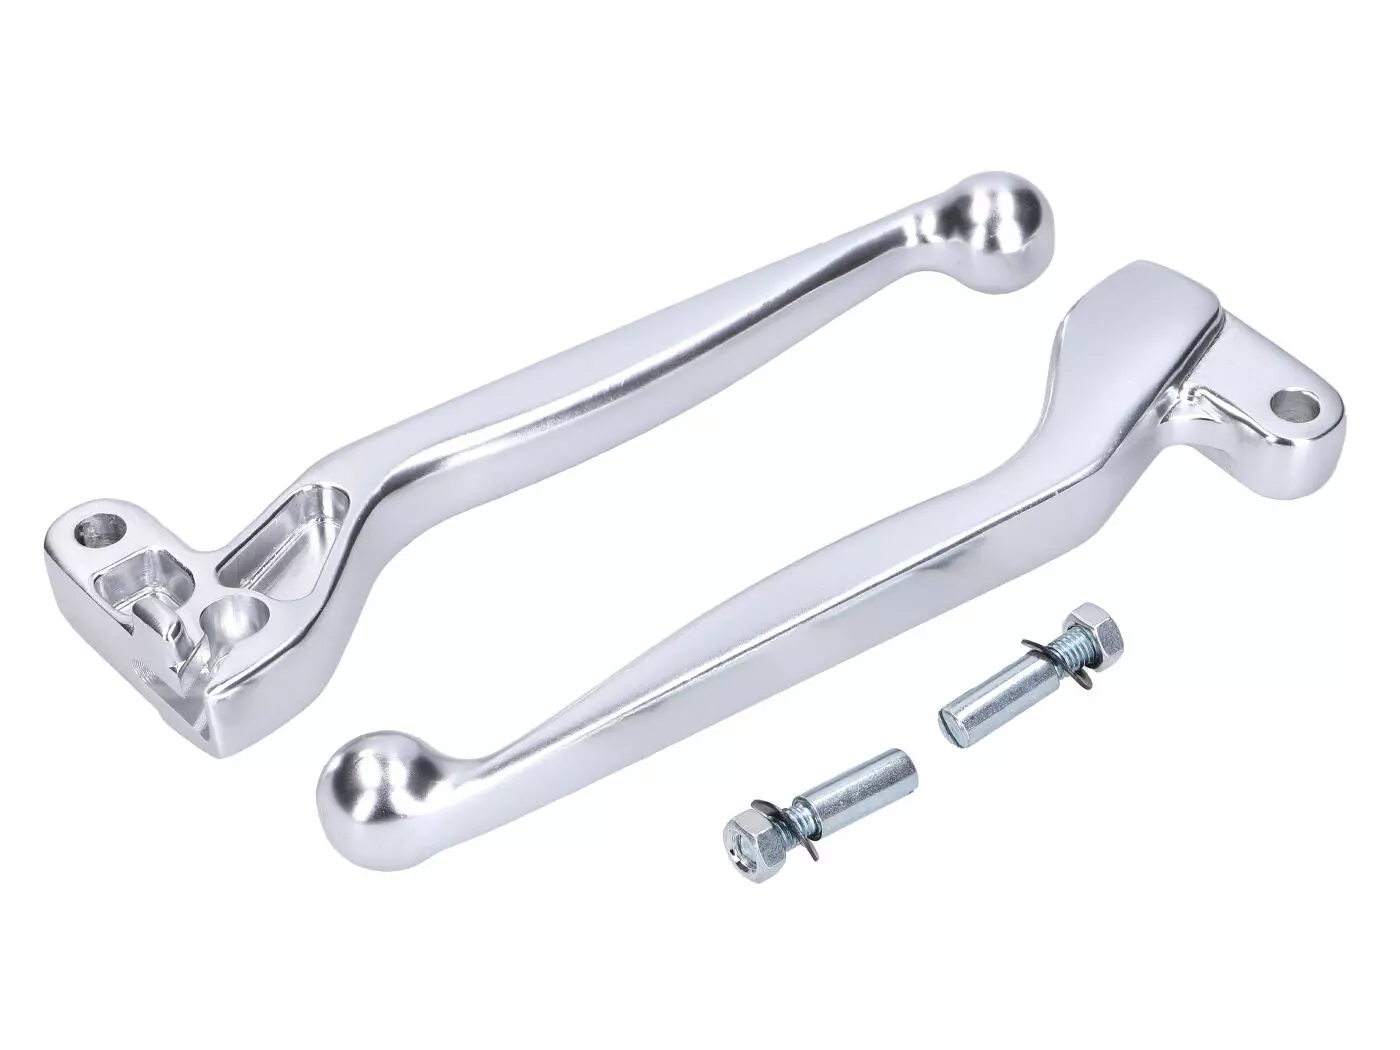 Clutch And Brake Lever Set ALU Anodized, Silver Color For Simson S50, S51, S53, S70, S83, SR50, SR80